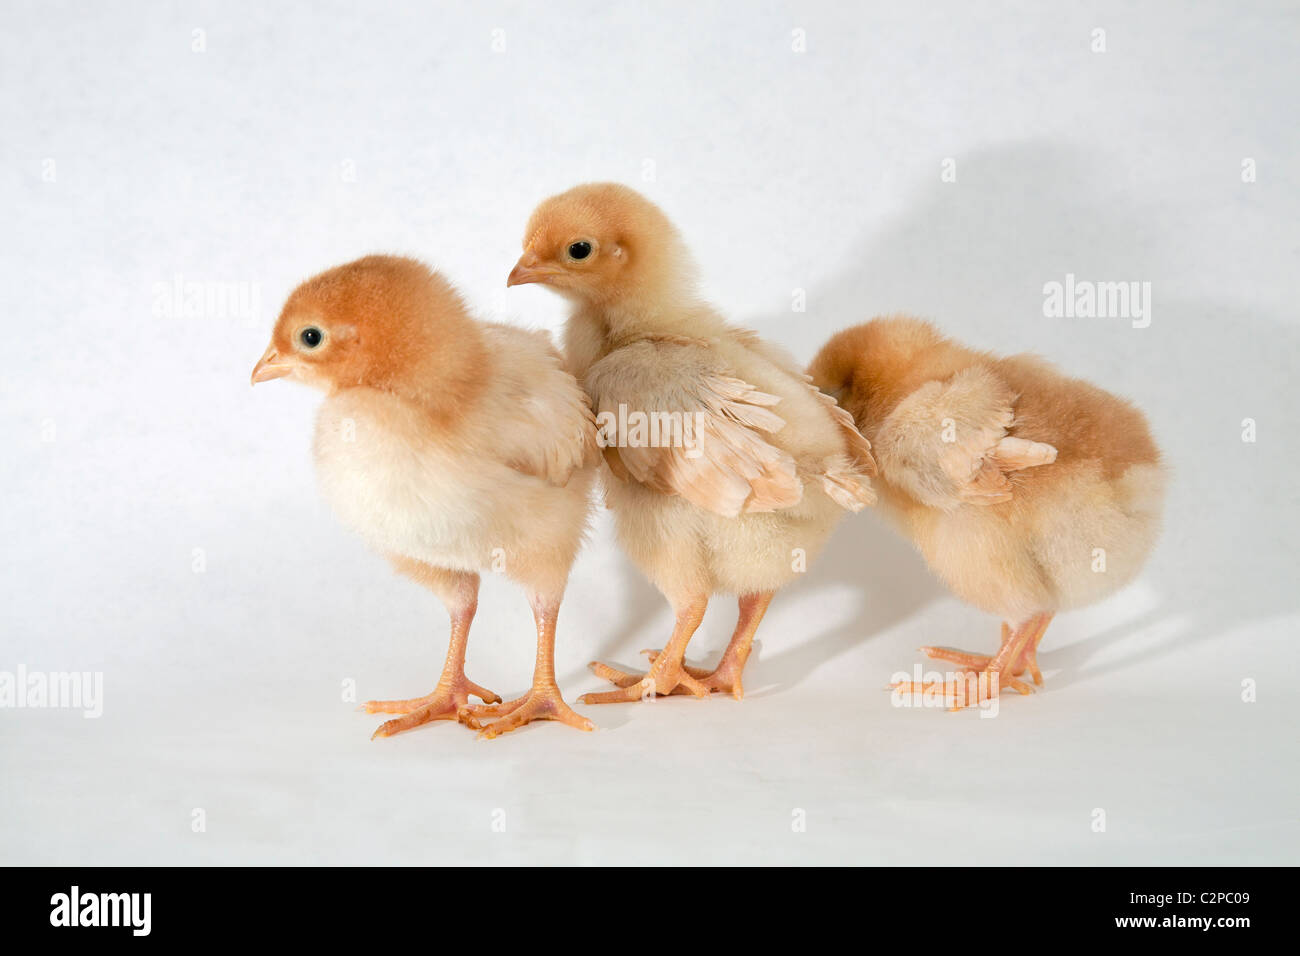 Baby sexlink chicks or chickens Stock Photo